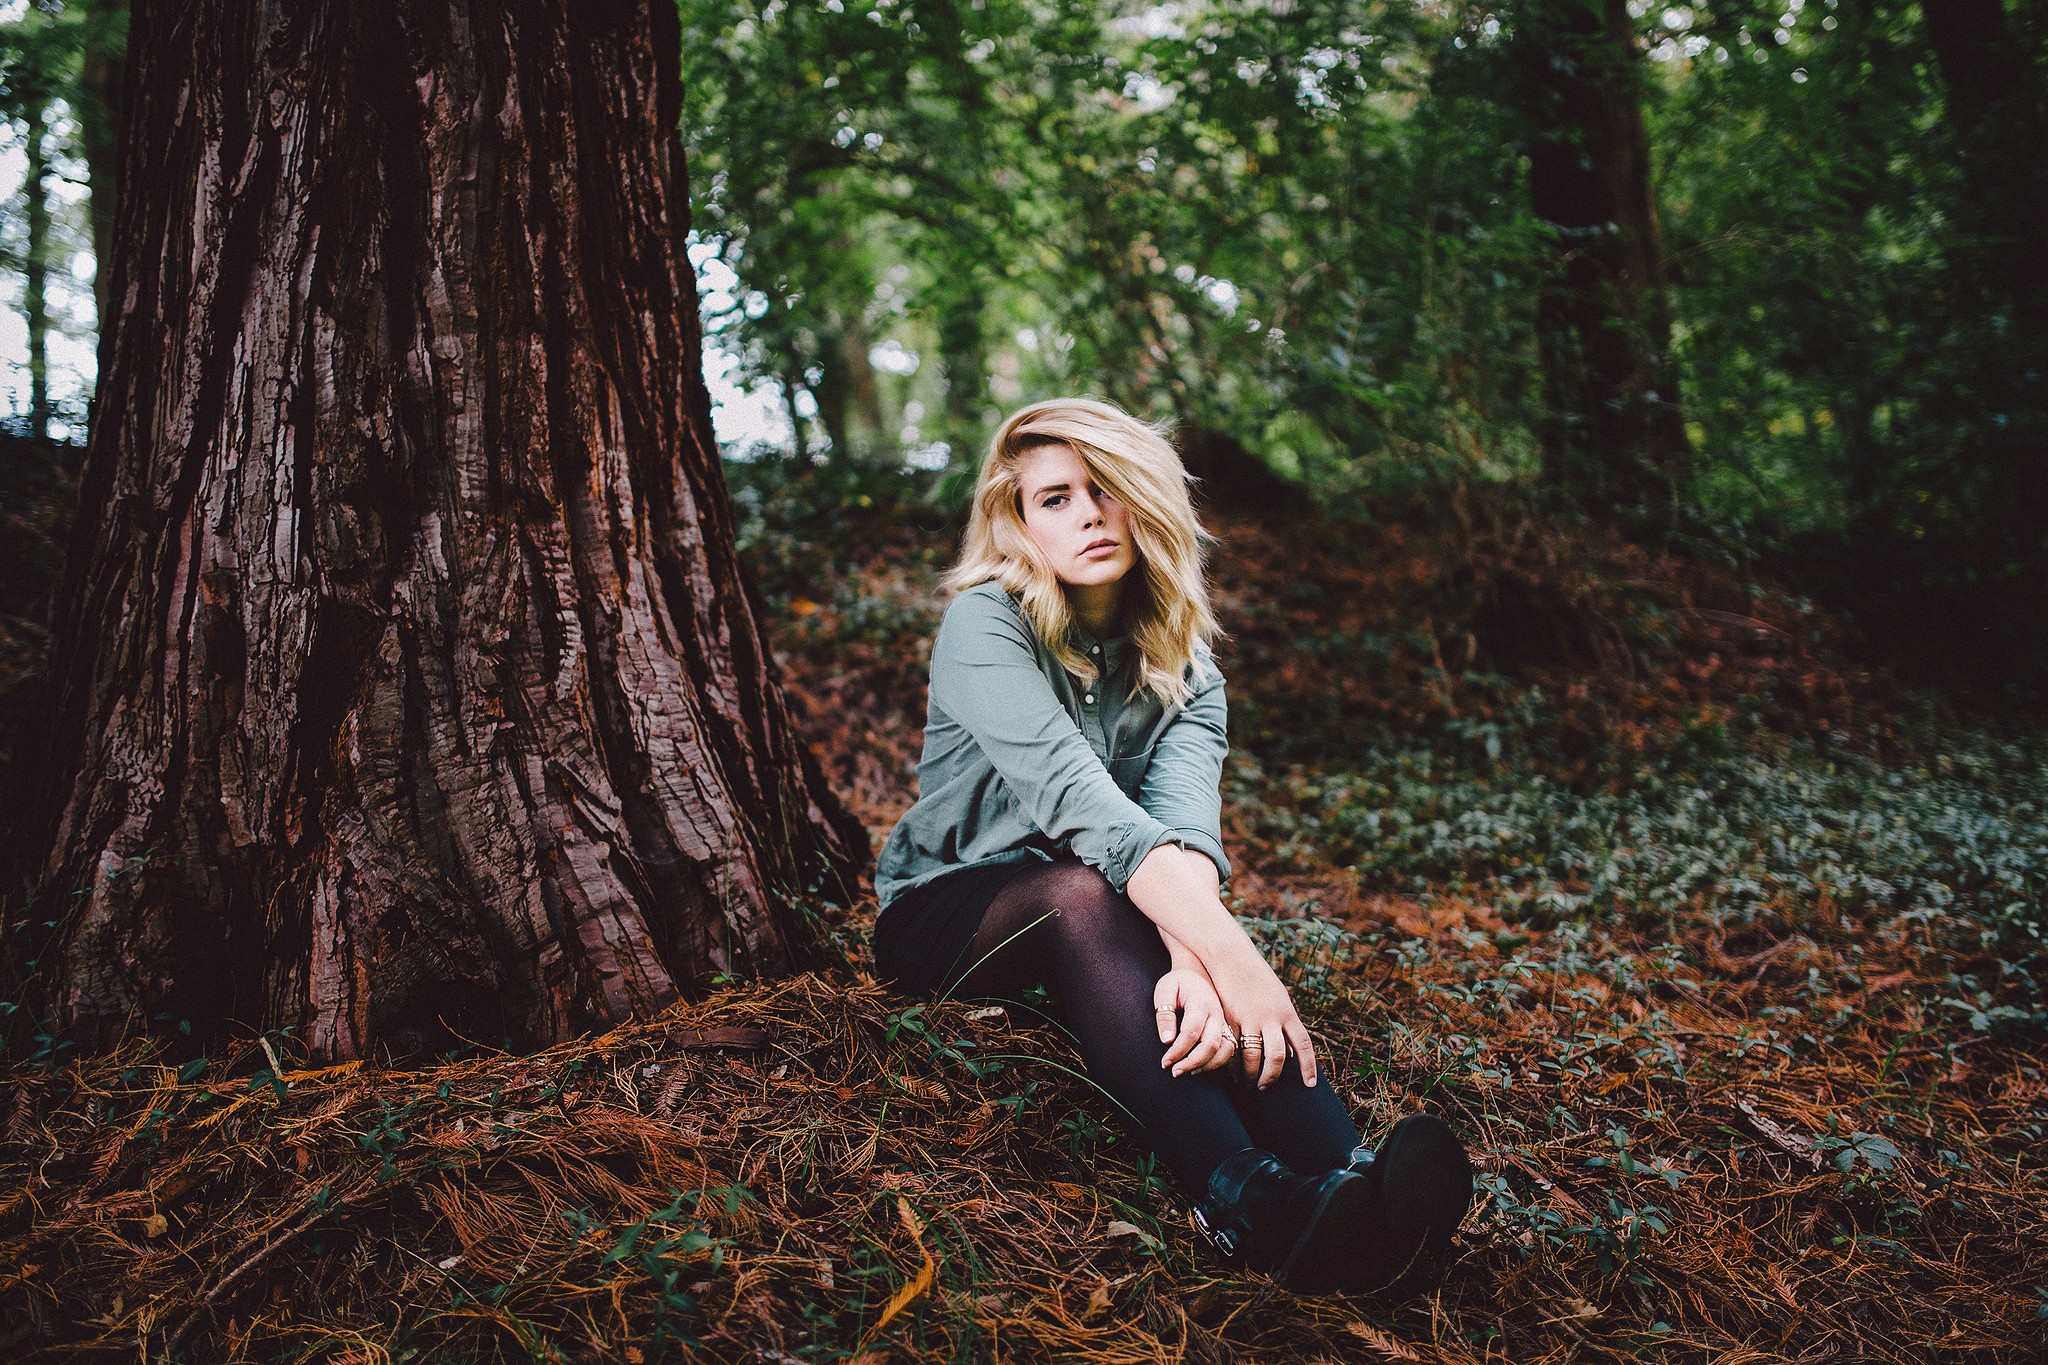 Women Blonde Hair In Face Sitting Forest Women Outdoors Hands On Legs Looking Away 2048x1365